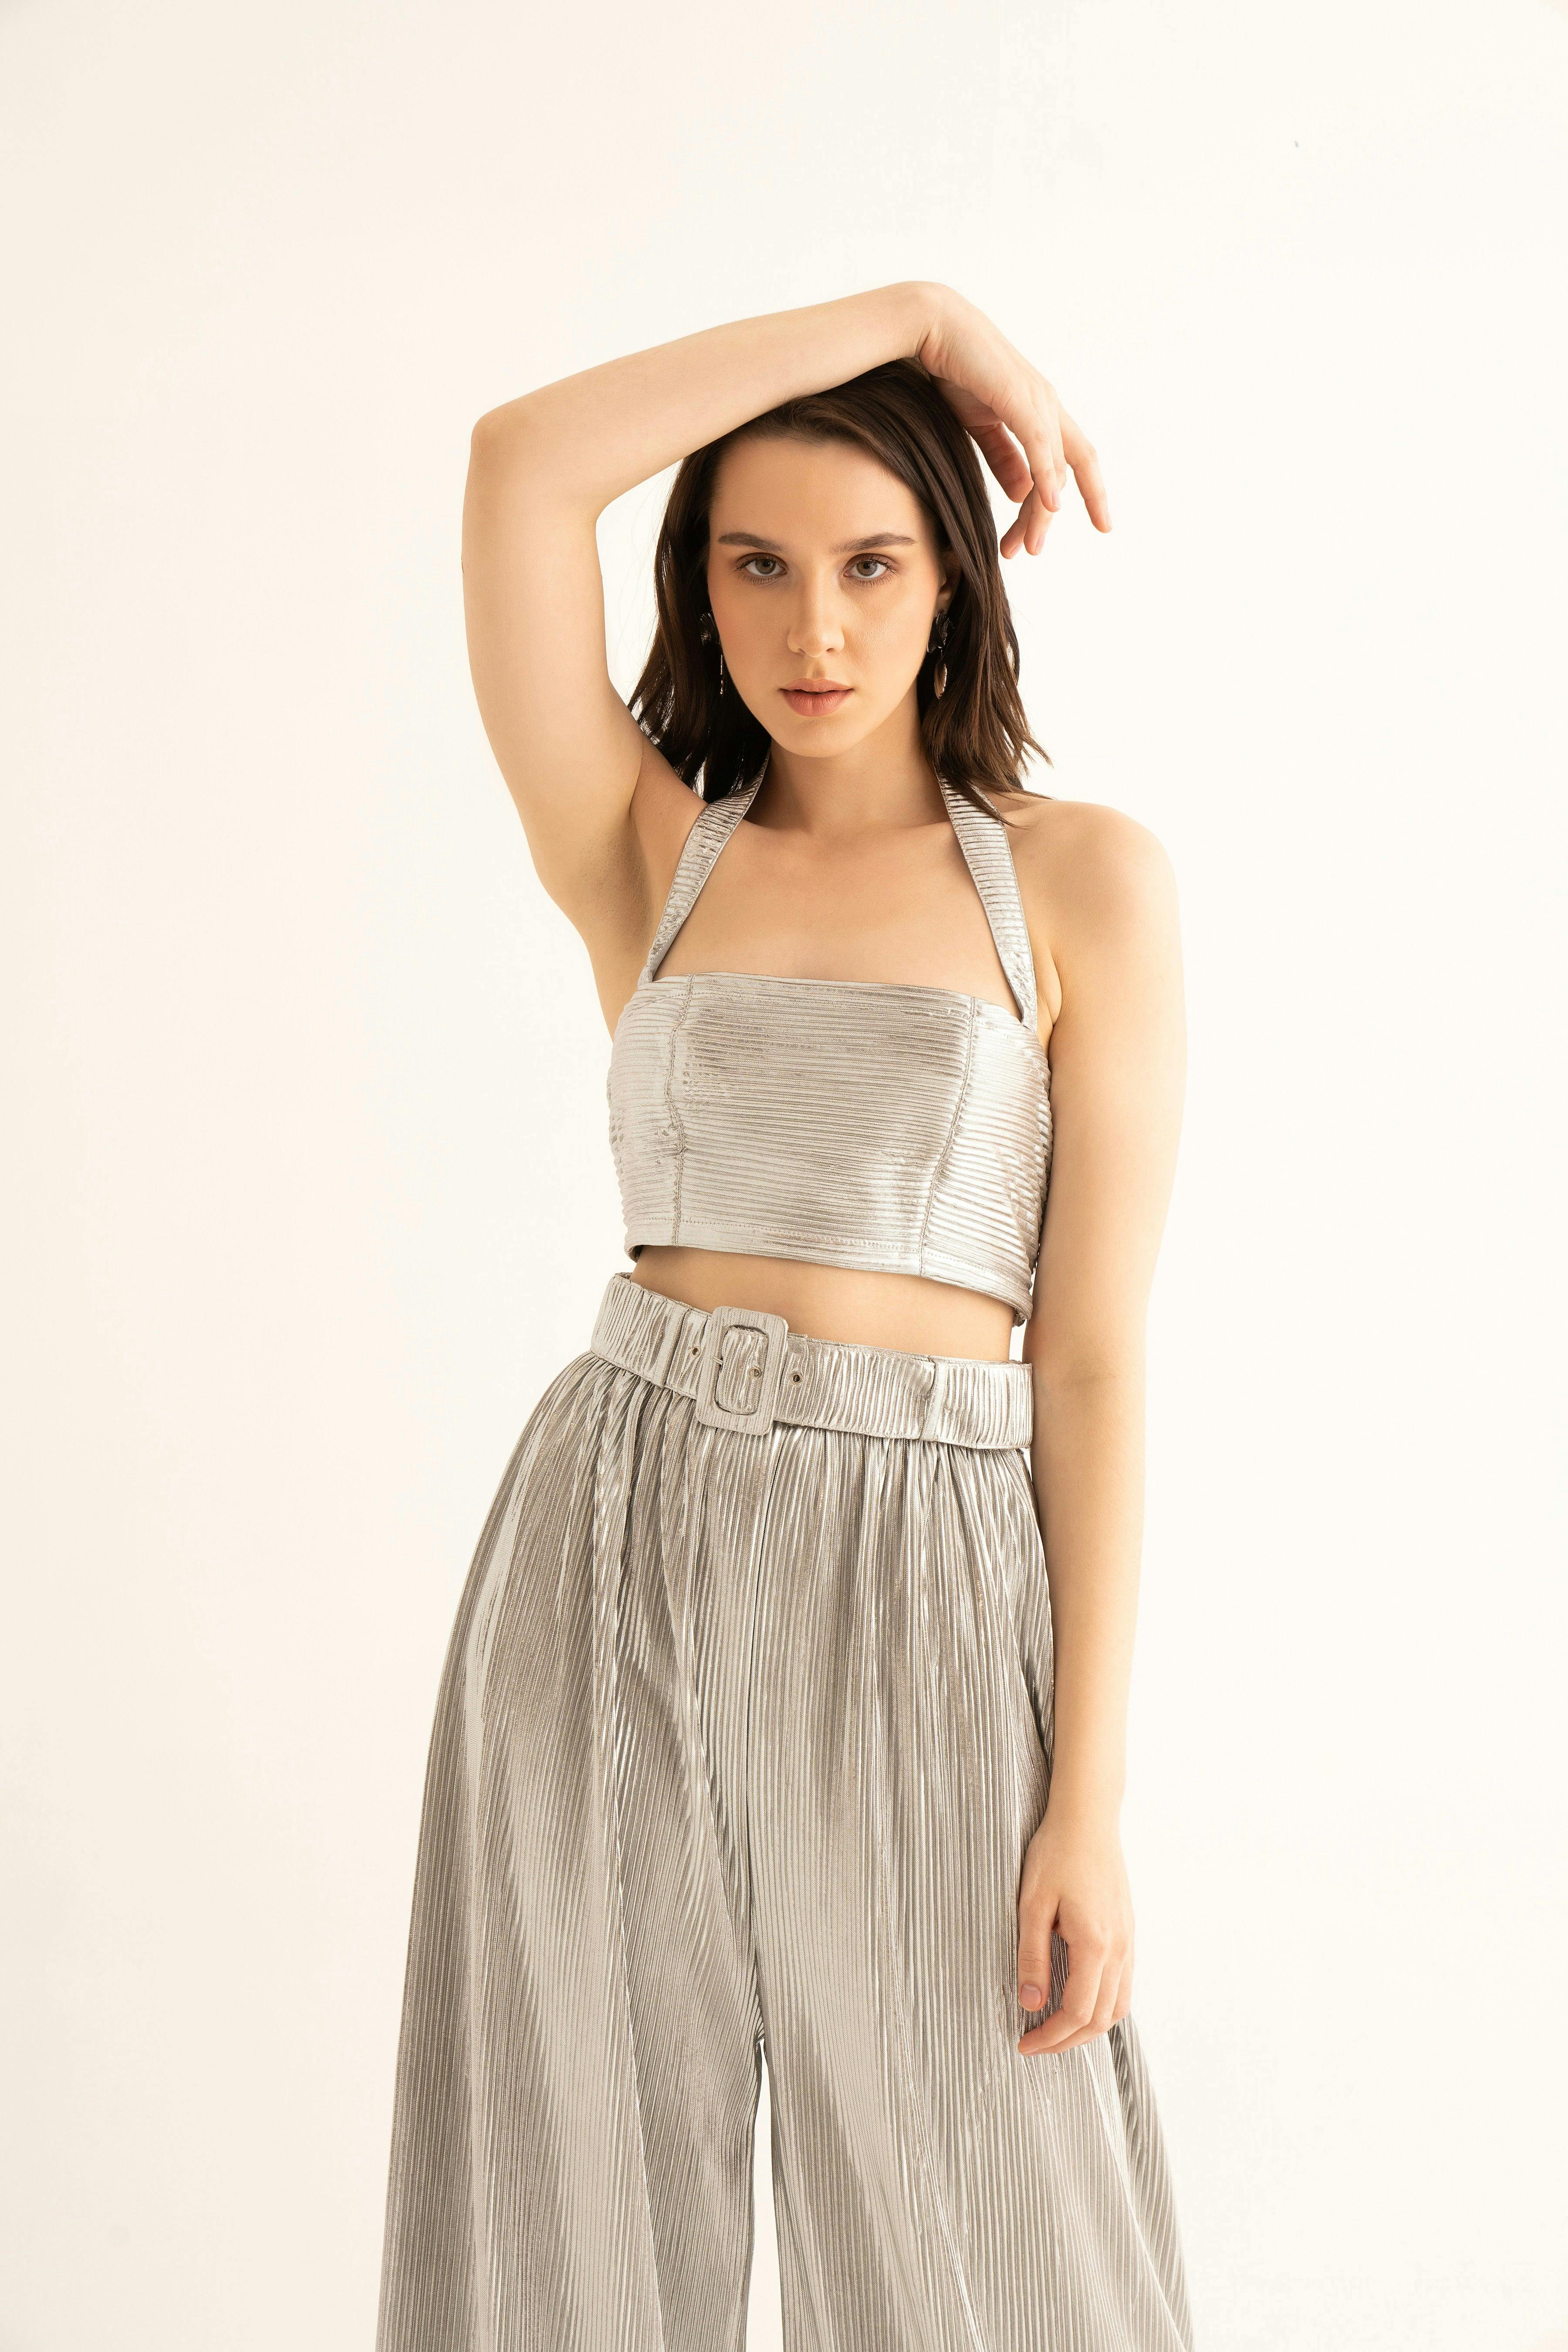 Silver Pleated Crop Top, a product by Torqadorn